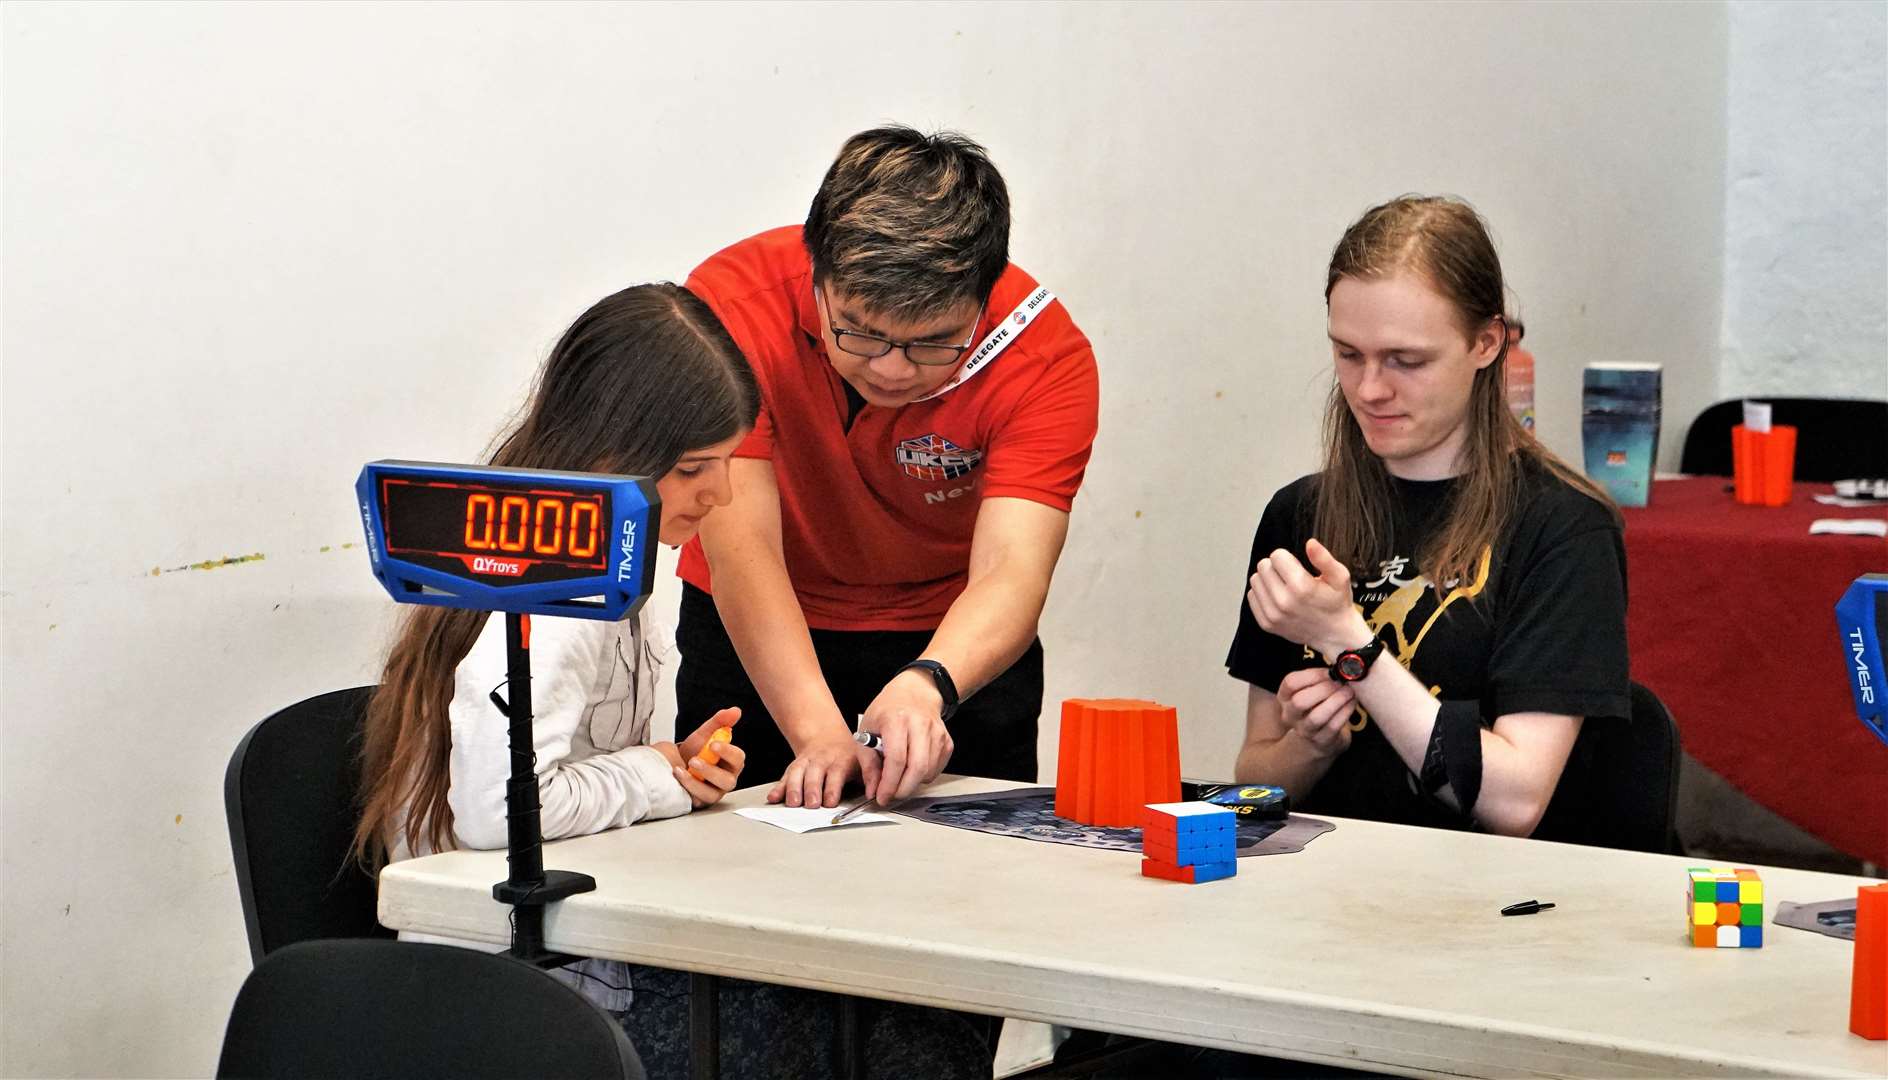 Nevins Chan, in red shirt, helps as the competition gets underway with electronic timers showing results. Picture: DGS